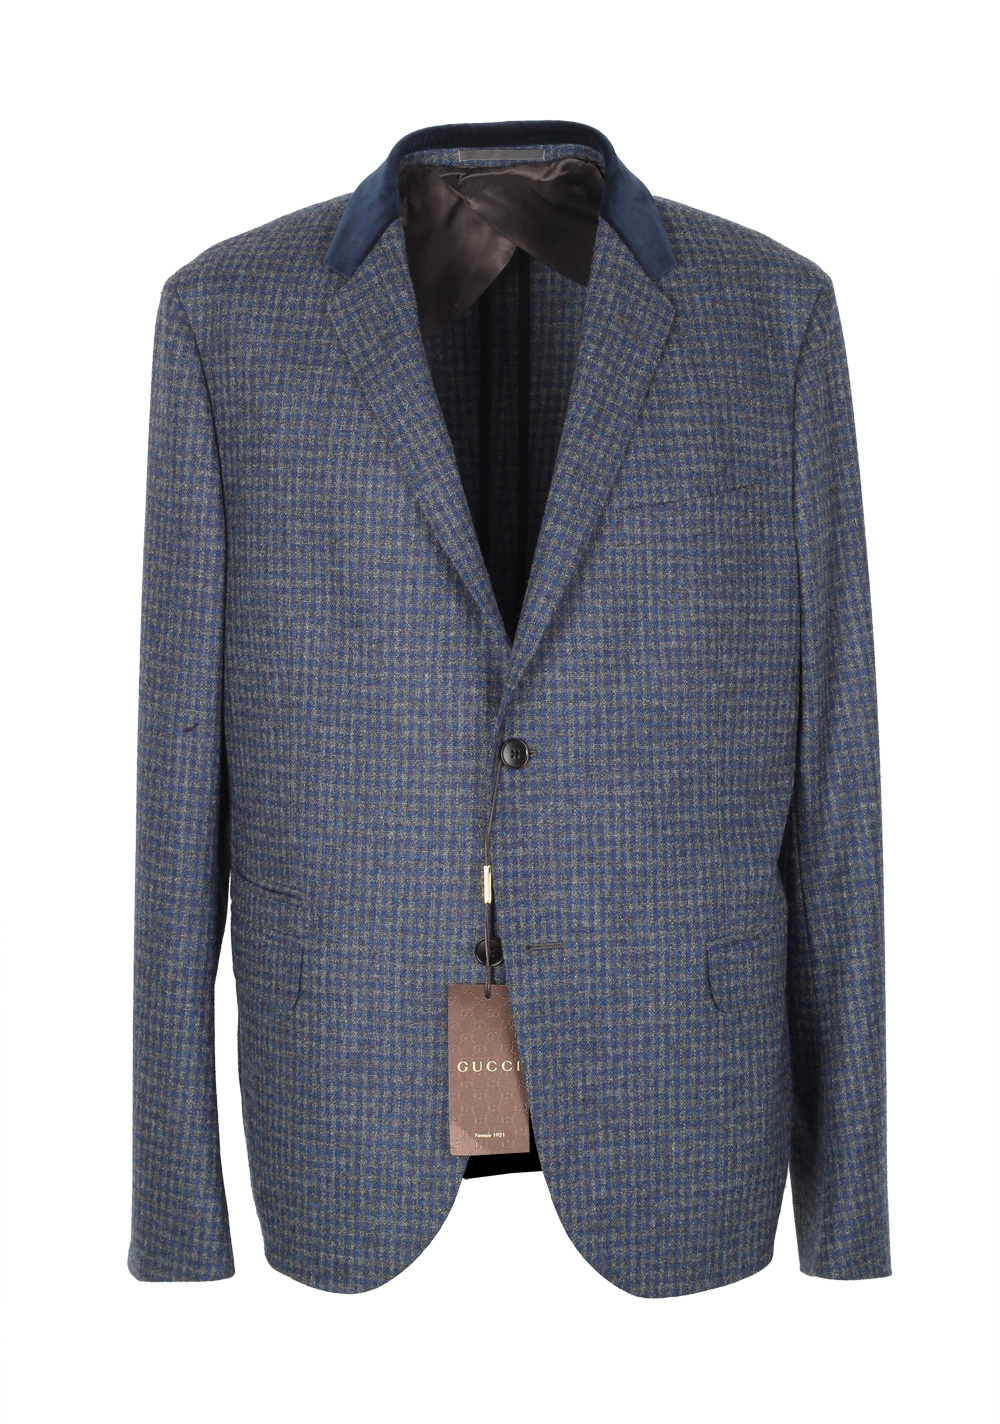 Gucci Blue Checked Sport Coat Size 54 / 44R U.S. In Wool | Costume Limité